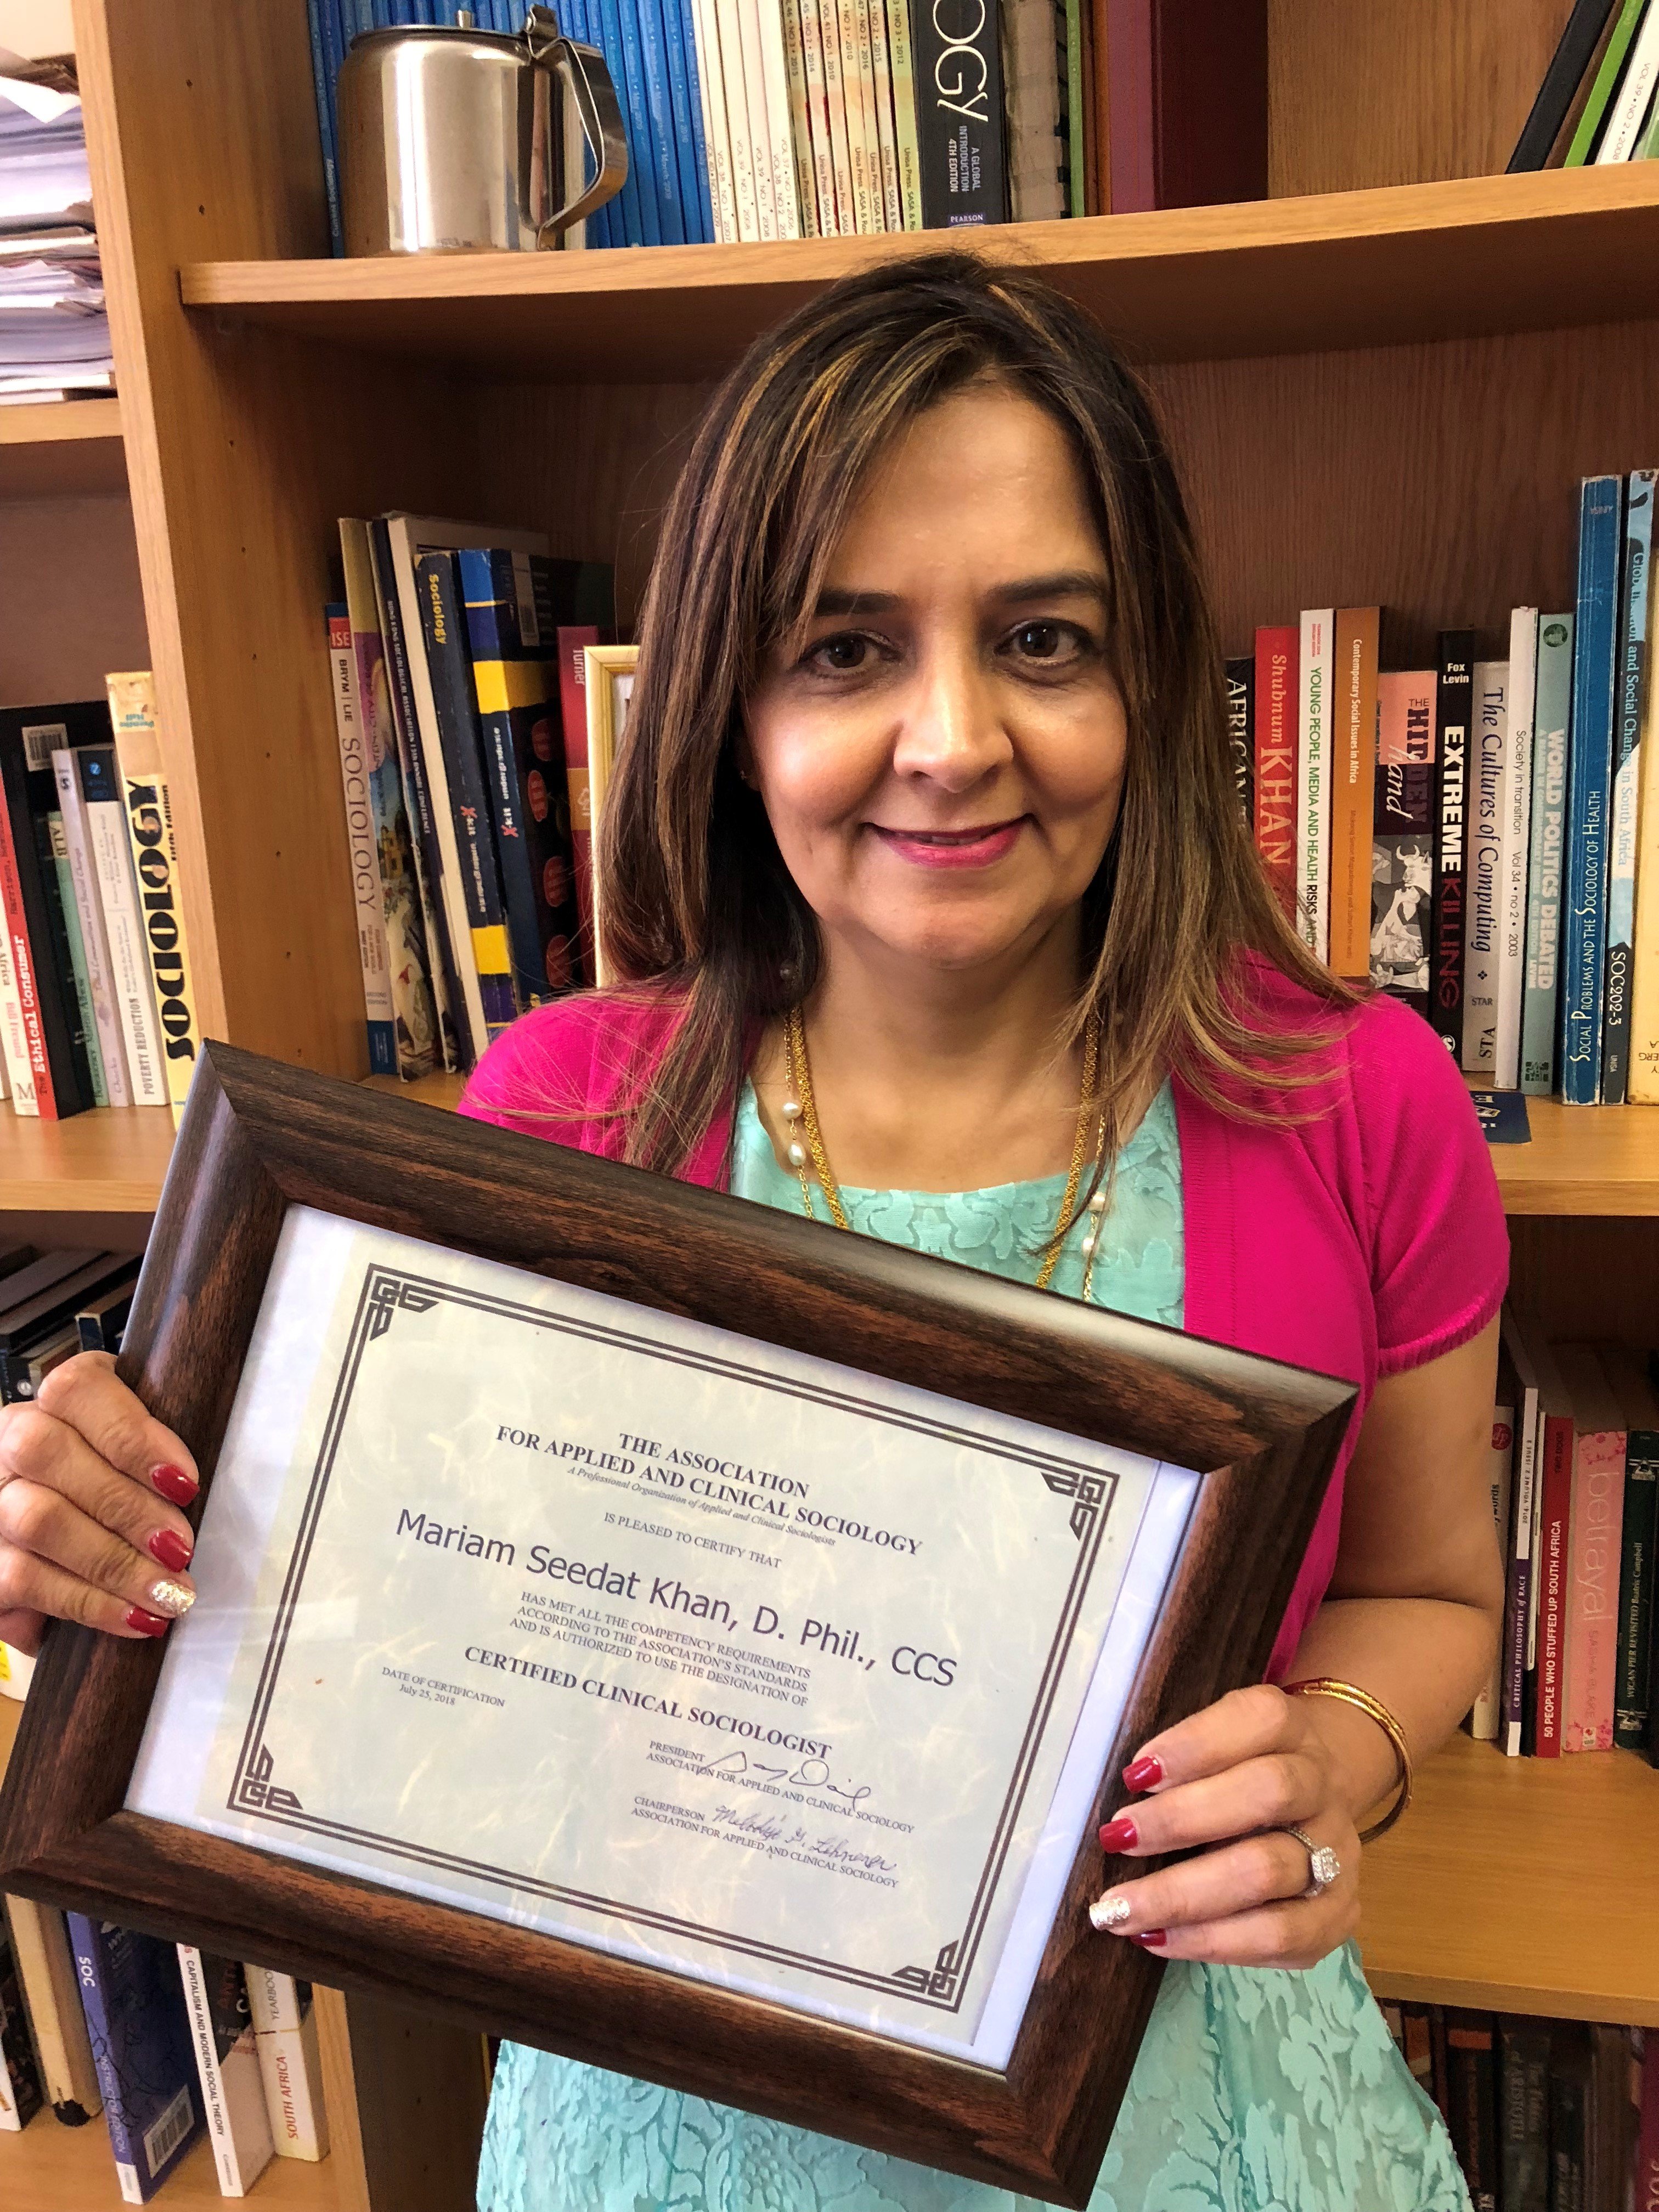 Mariam with her certificate from the Association for Applied and Clinical Sociology (AACS). | Source: Dr. Mariam Seedat Khan